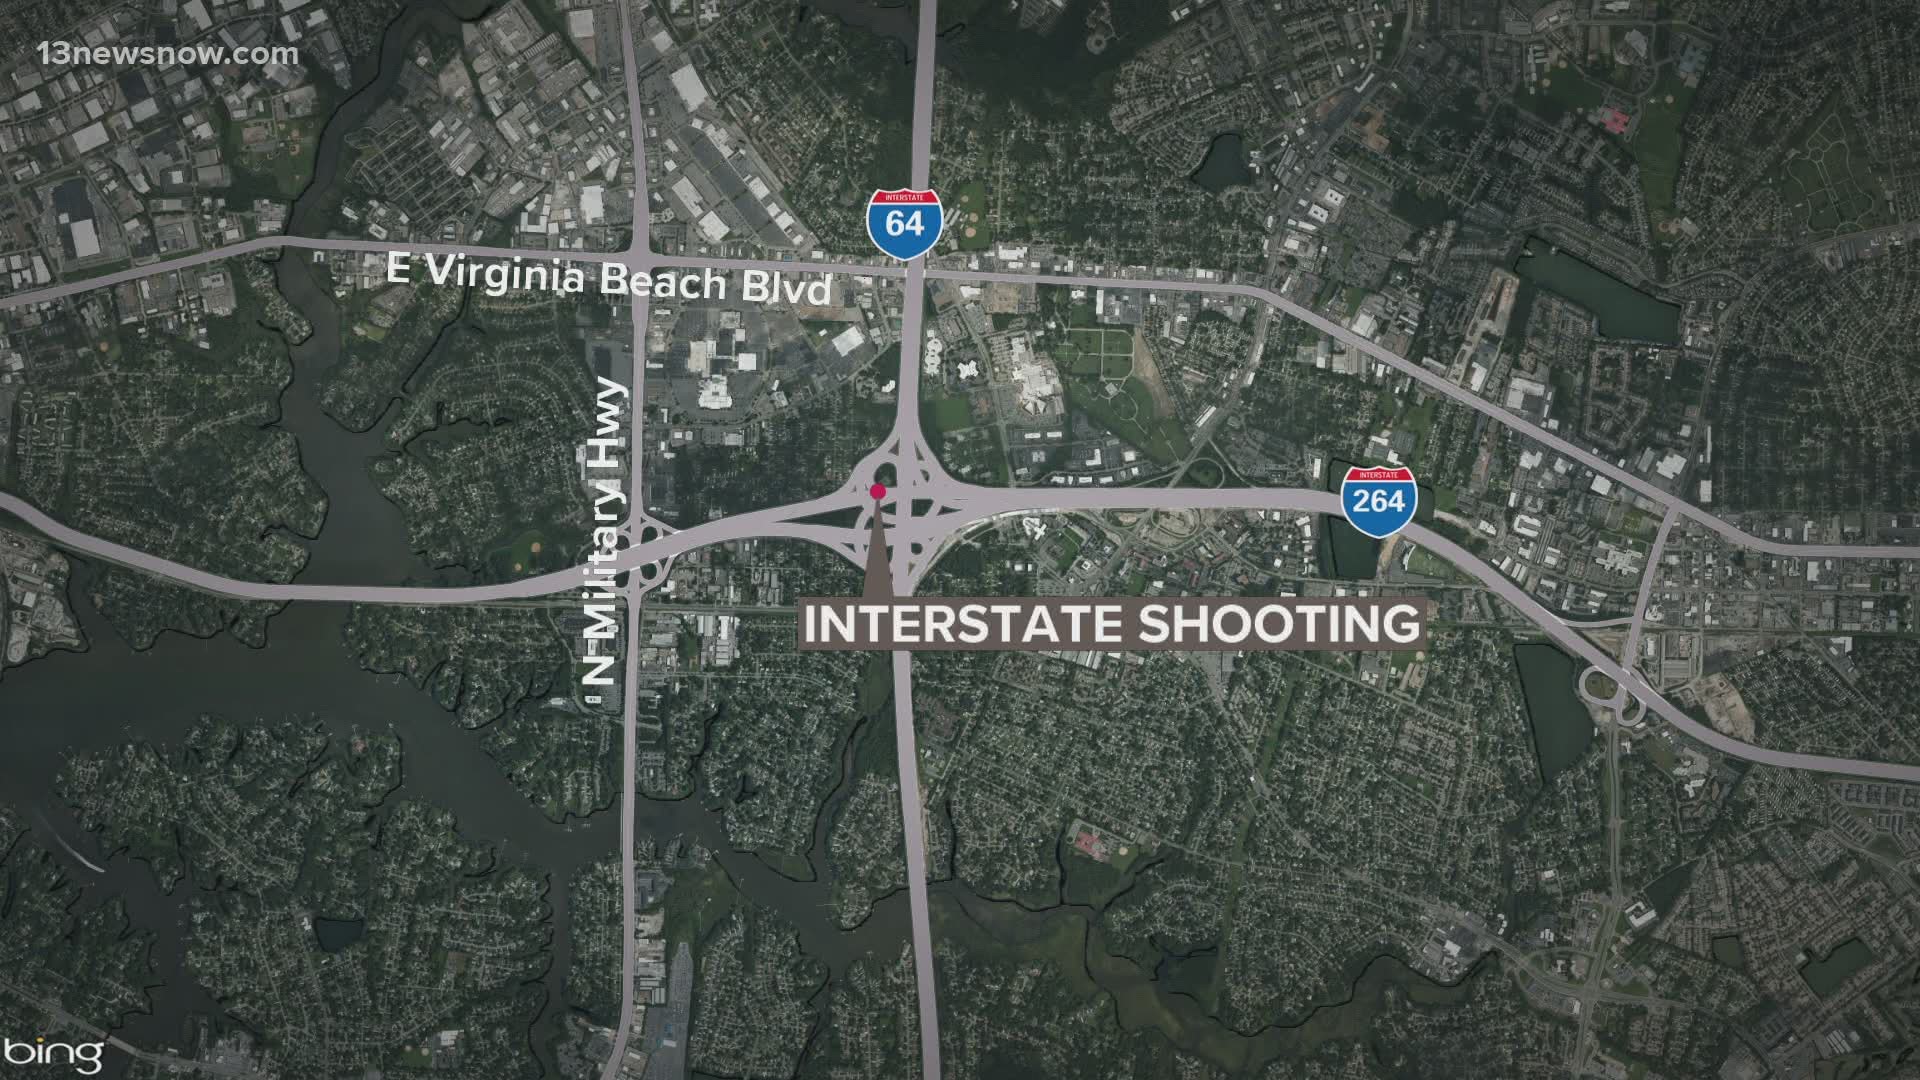 Virginia State police said someone opened fire on four people who were in a car near the Interstate 264-64 interchange. The driver died. A passenger was hurt.